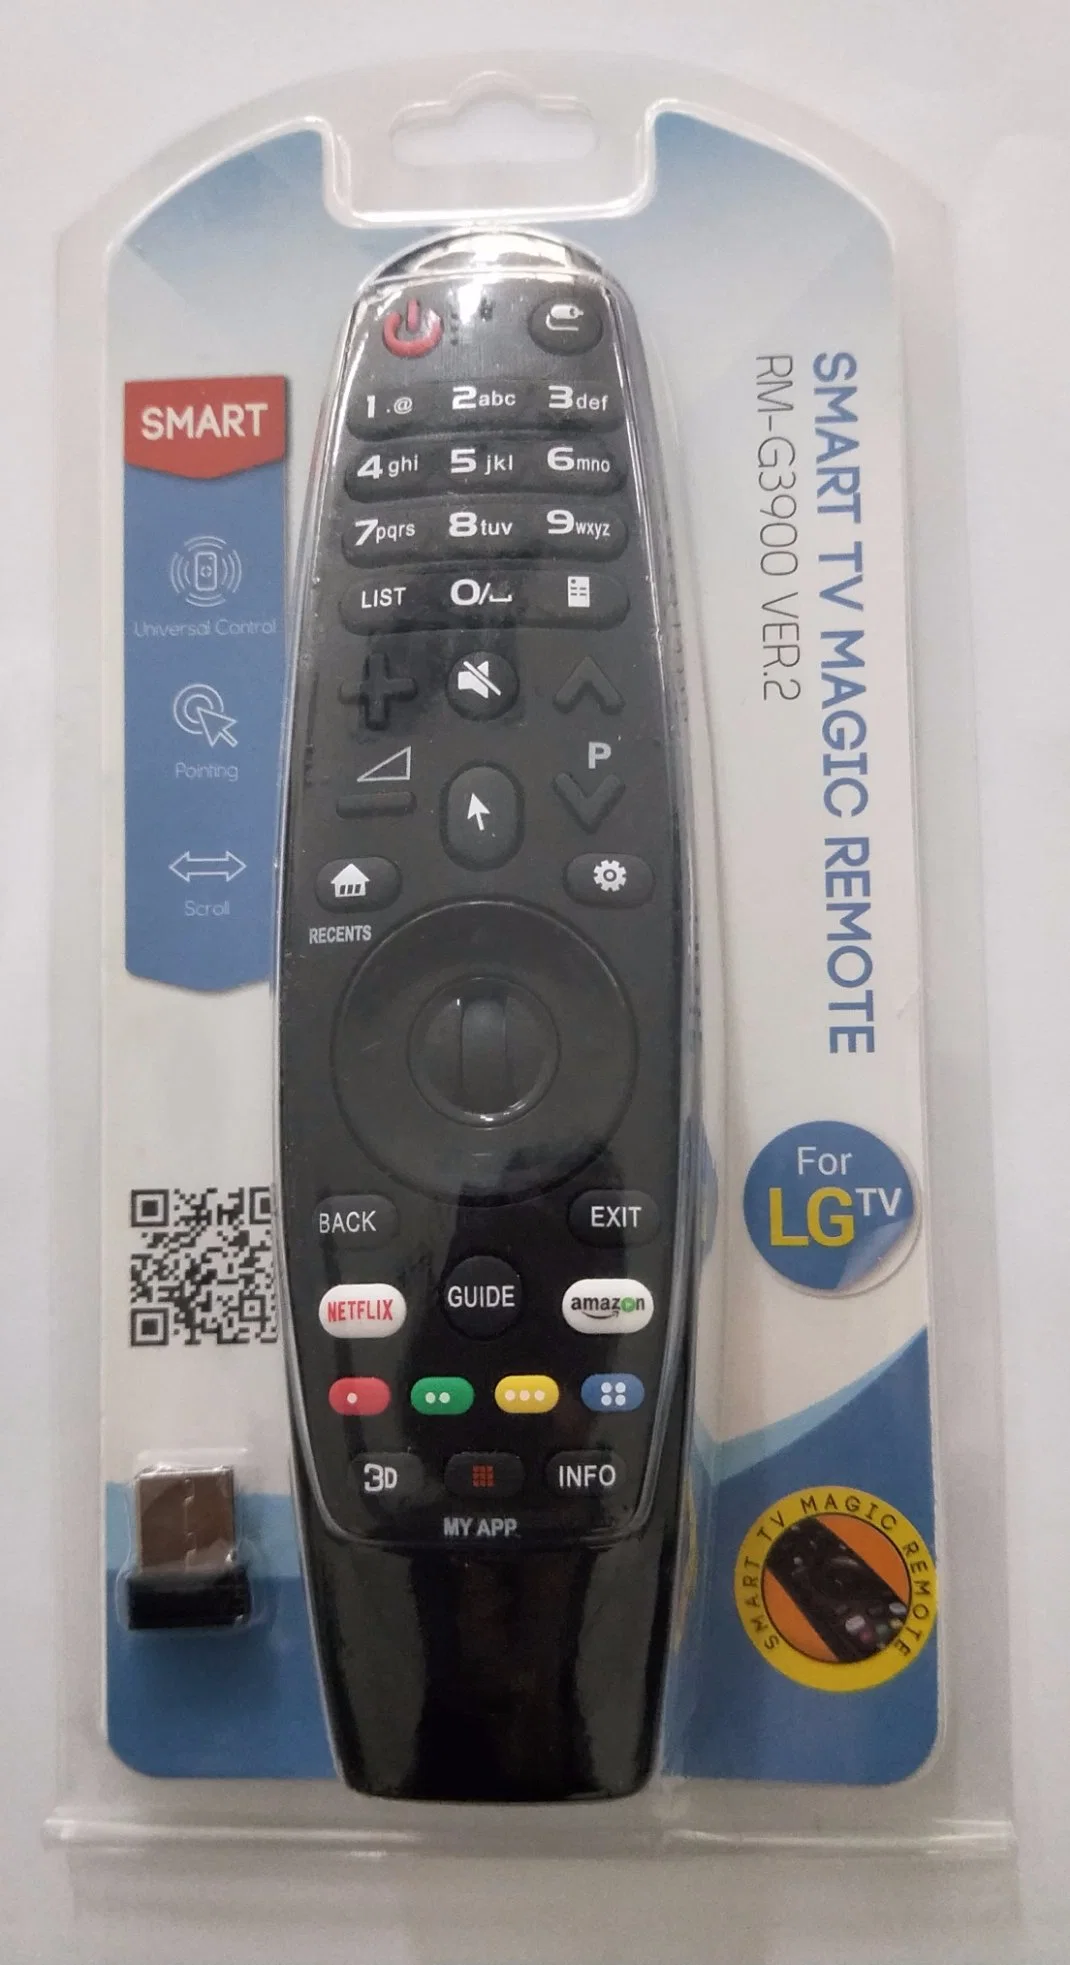 RM-G3900 Remote Control for LG Smart TV, Hot Selling